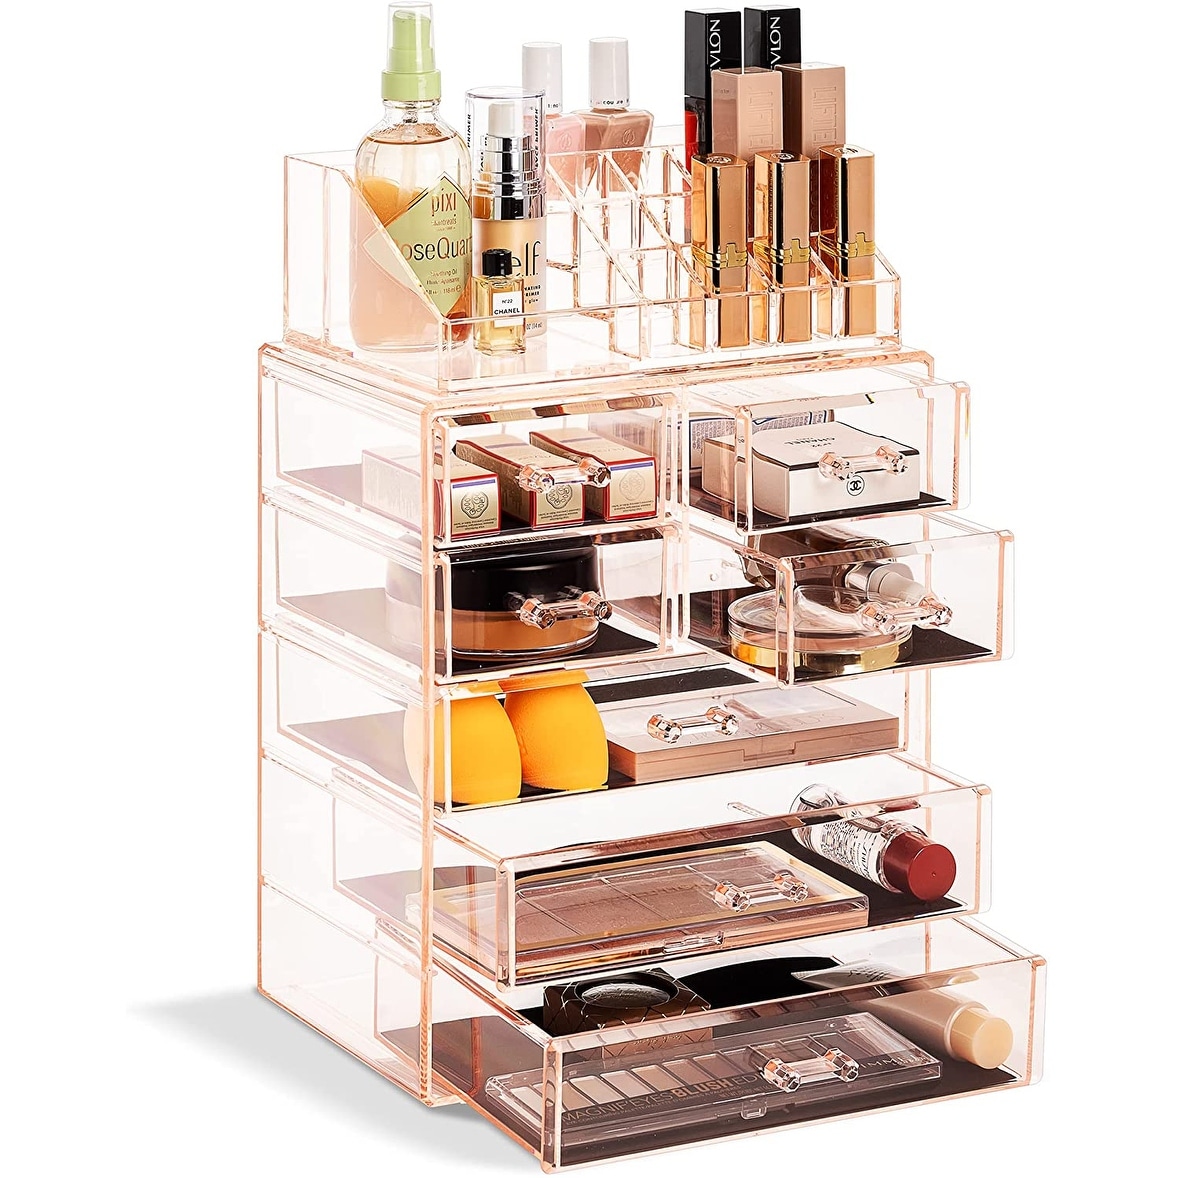 https://ak1.ostkcdn.com/images/products/is/images/direct/ea29099a070f7e2eafc24f7c1d7c32768f2a9adb/Sorbus-Acrylic-Cosmetic-Makeup-and-Jewelry-Storage-Case-Display.jpg